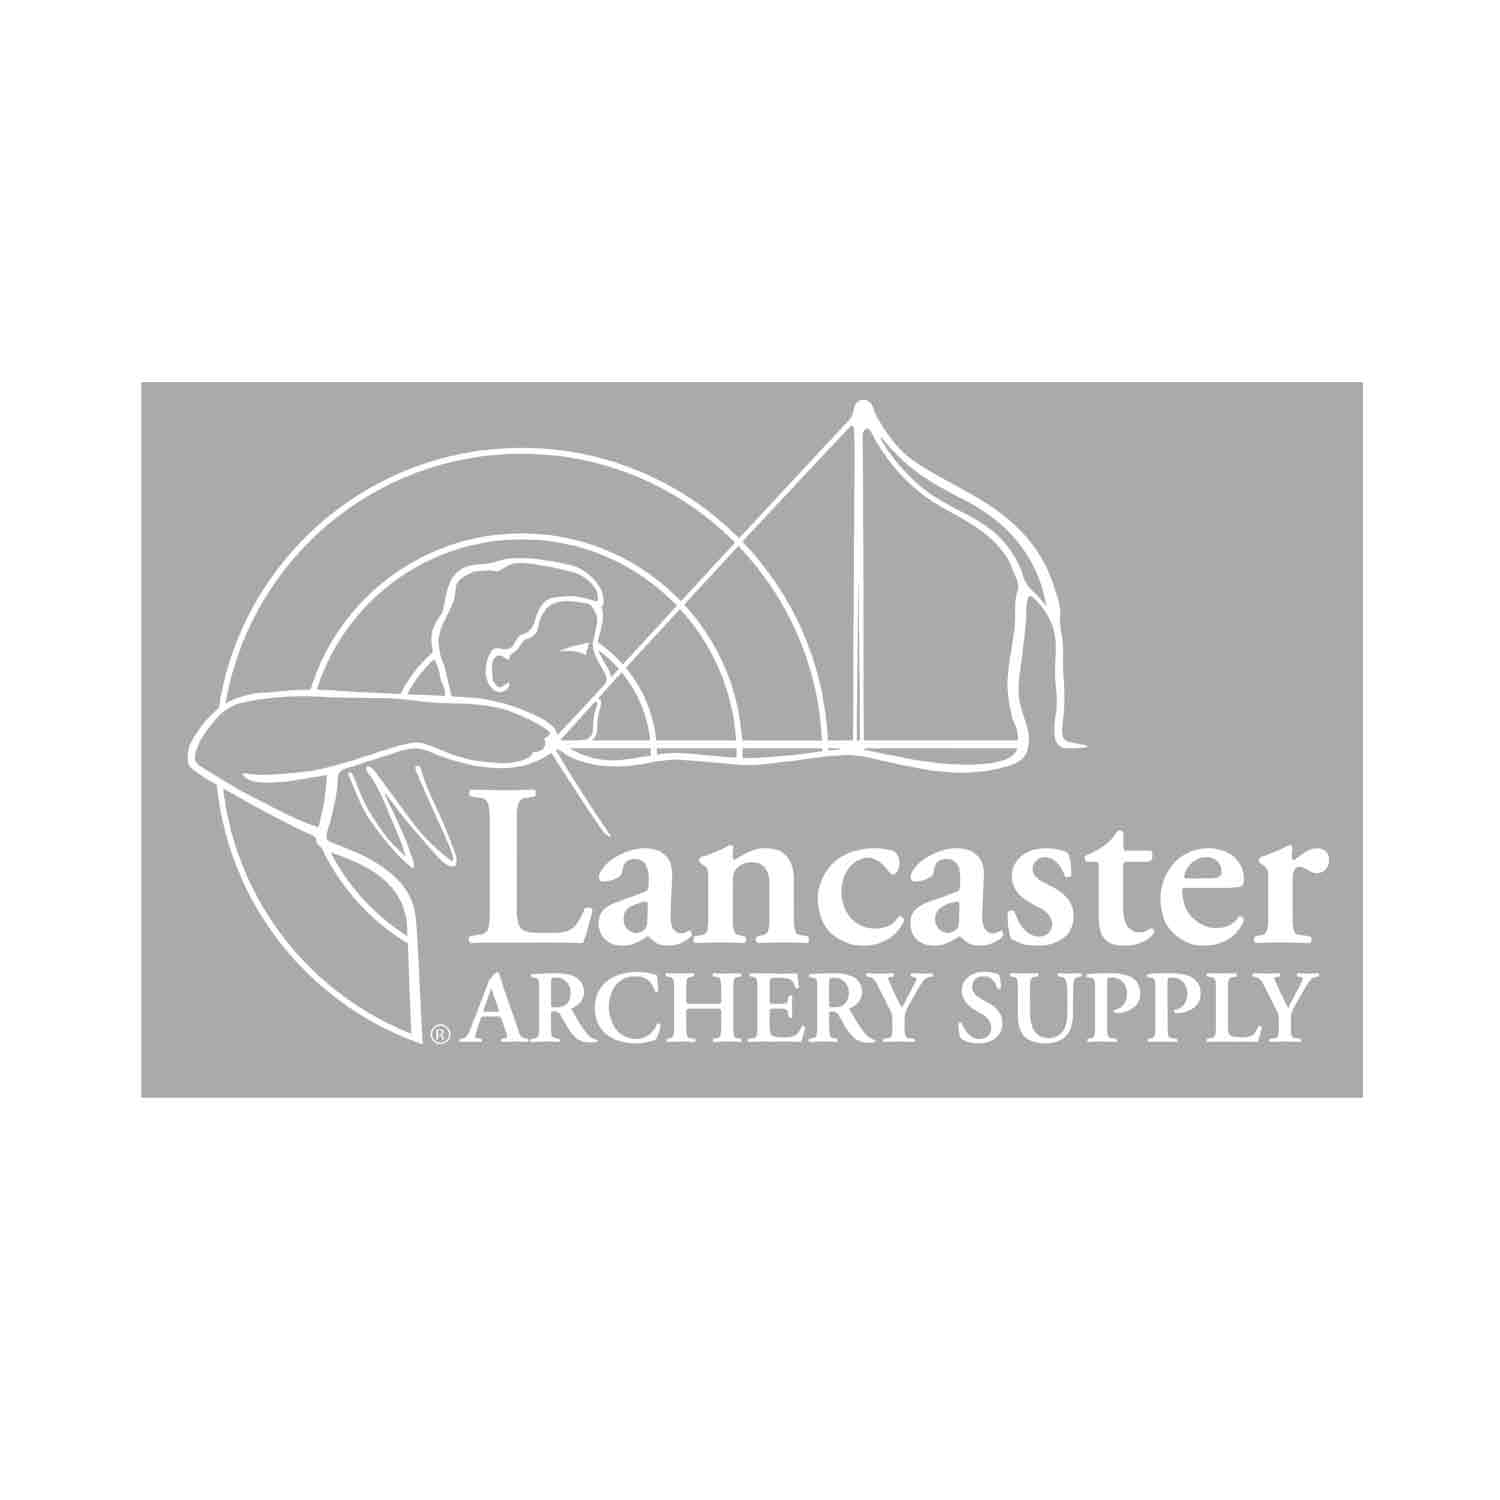 Lancaster Archery Supply Logo Decal (Small)